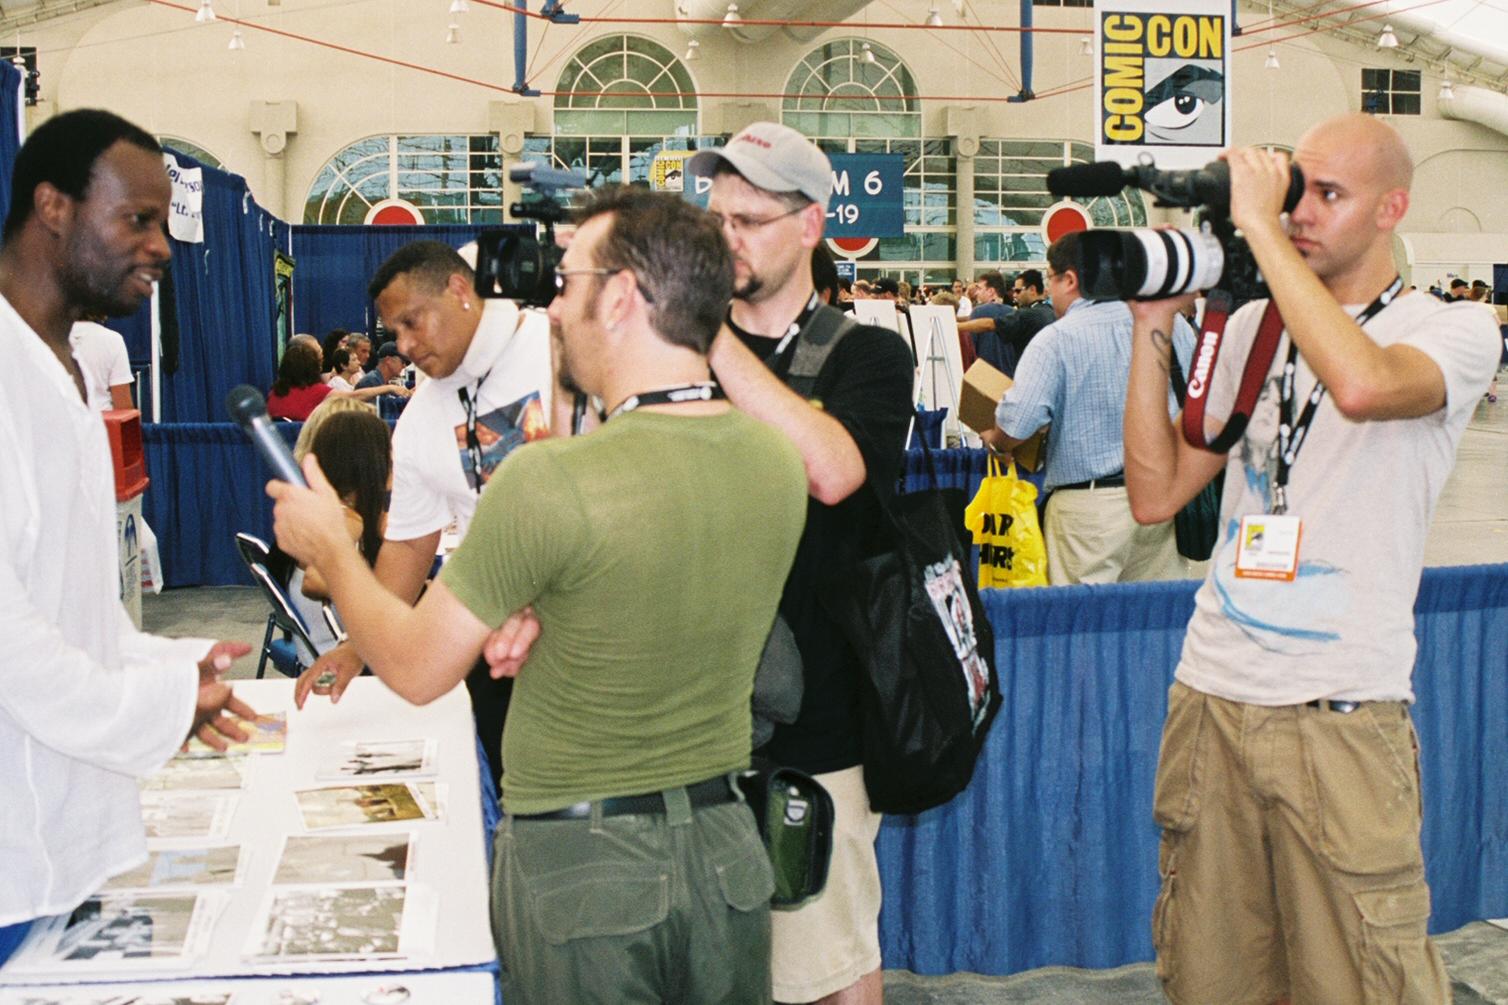 Grand L. Bush fields questions from international media at COMIC-CON in San Diego